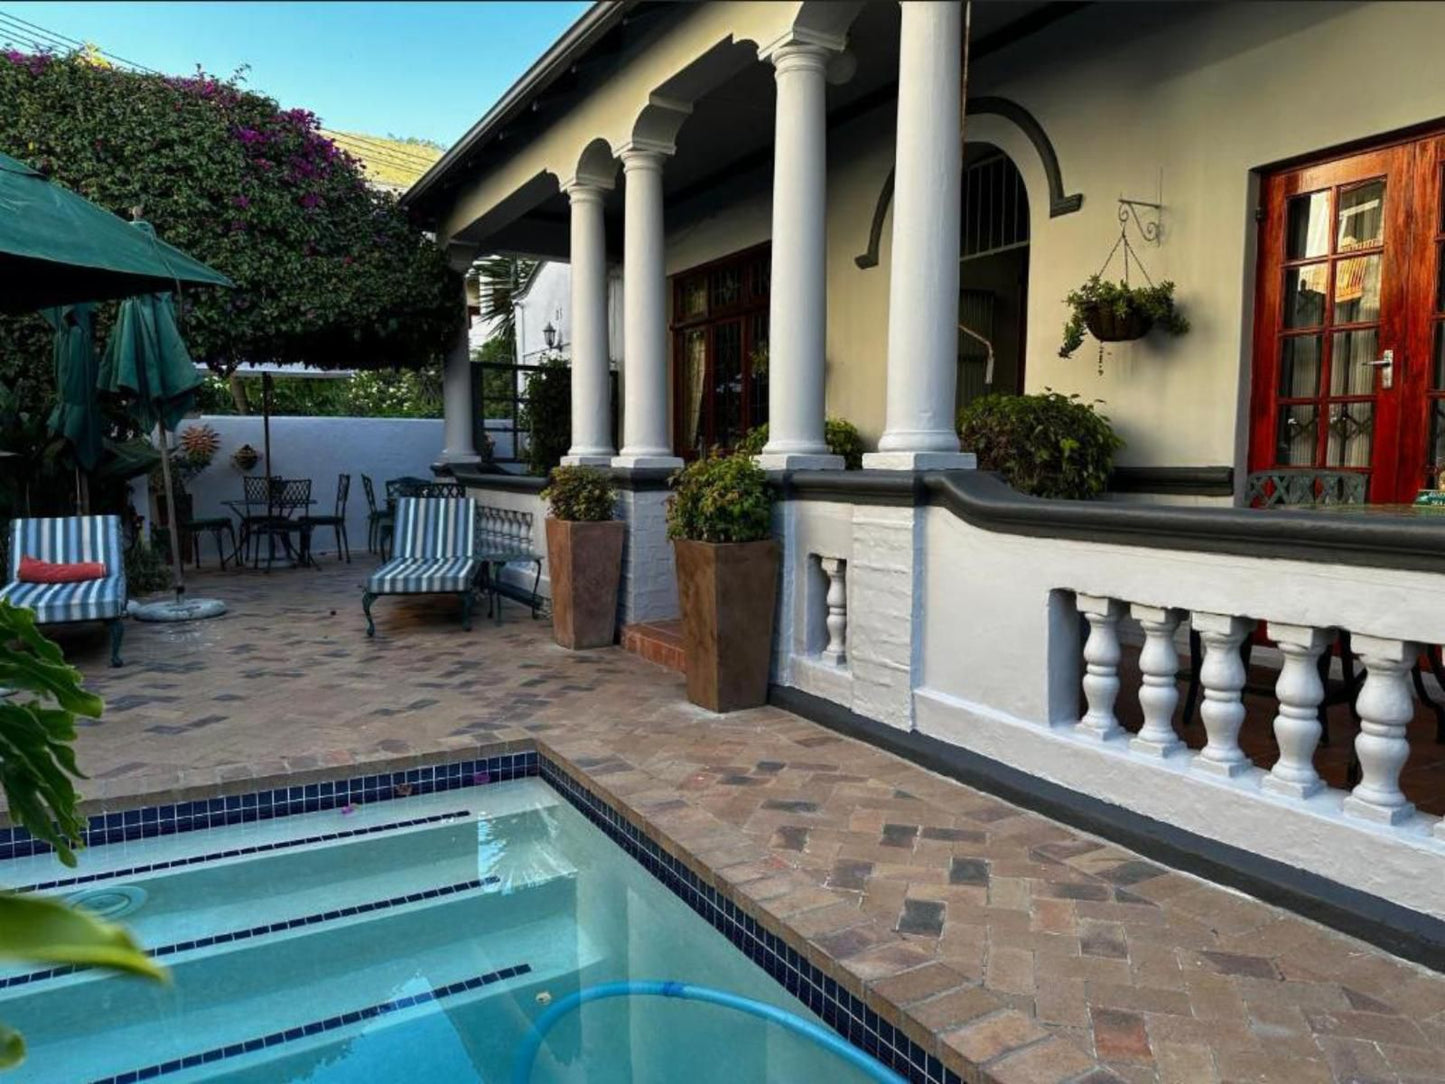 Olaf S Guesthouse Sea Point Cape Town Western Cape South Africa House, Building, Architecture, Swimming Pool